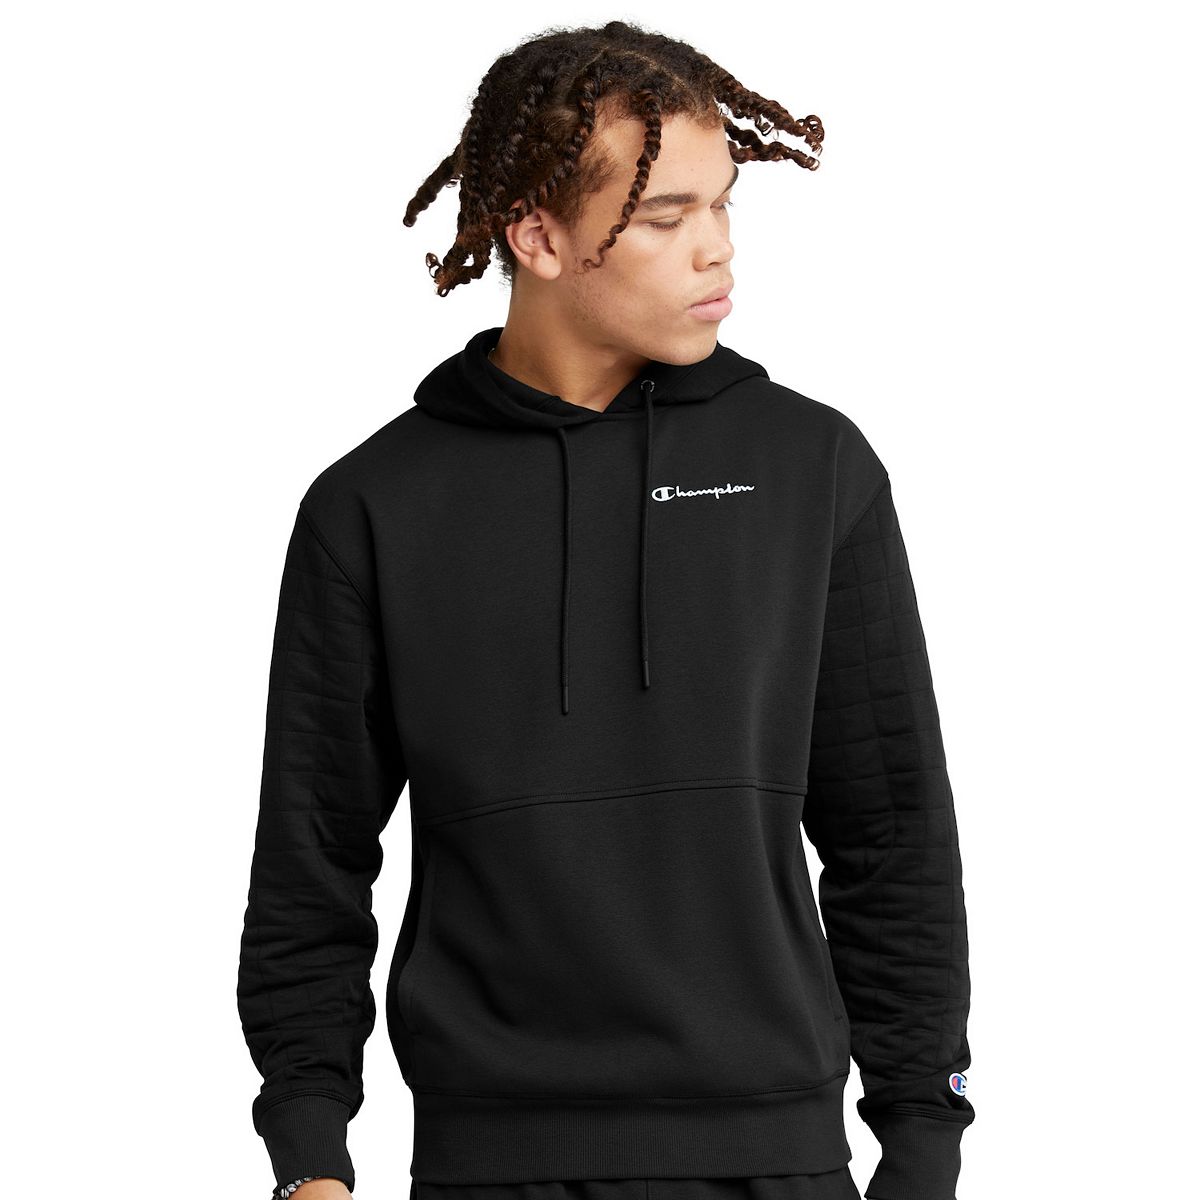 Champion Men's Quilted Fleece Hoodie (Black or Forest Peak Green) $16.25 + Free Shipping on $49+